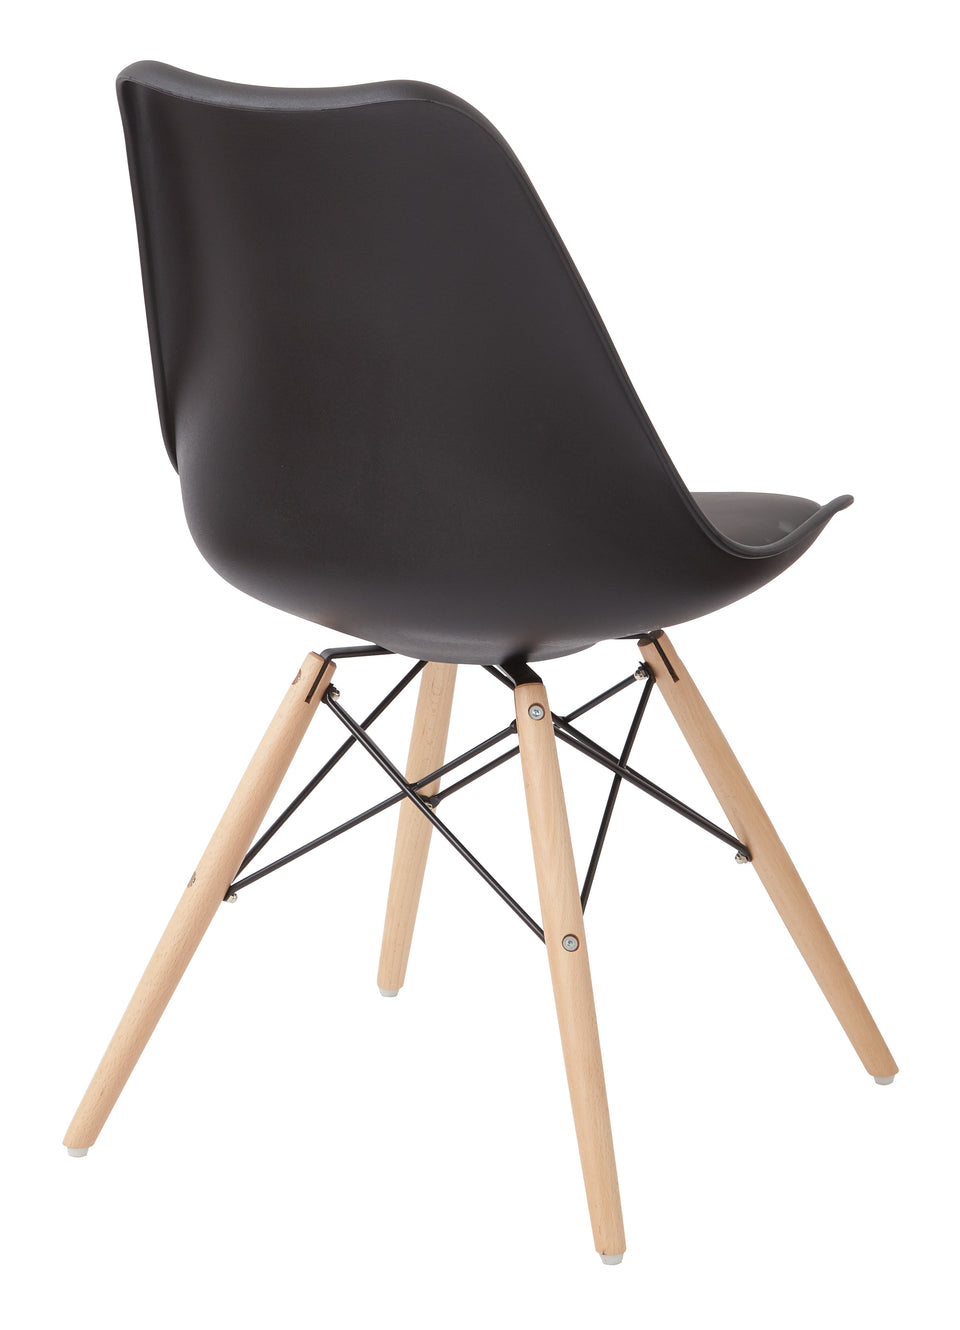 mid century modern aimes black bucket chair with natural post legs scandinavian design inspired from decurban.com back view